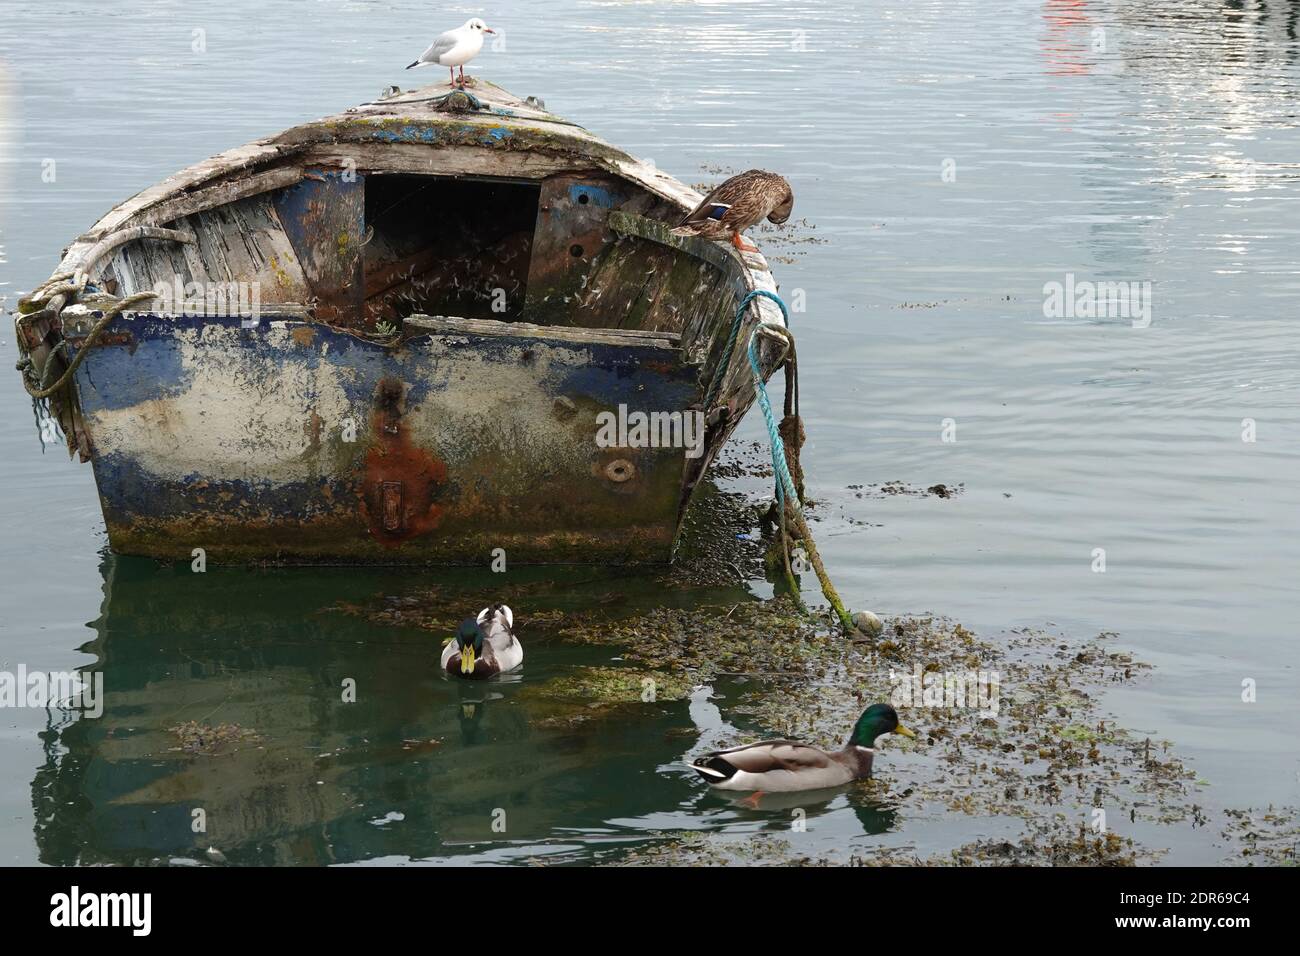 A neglected, old, small wooden rowing boat, rotting and rusting, with birds resting on it Stock Photo